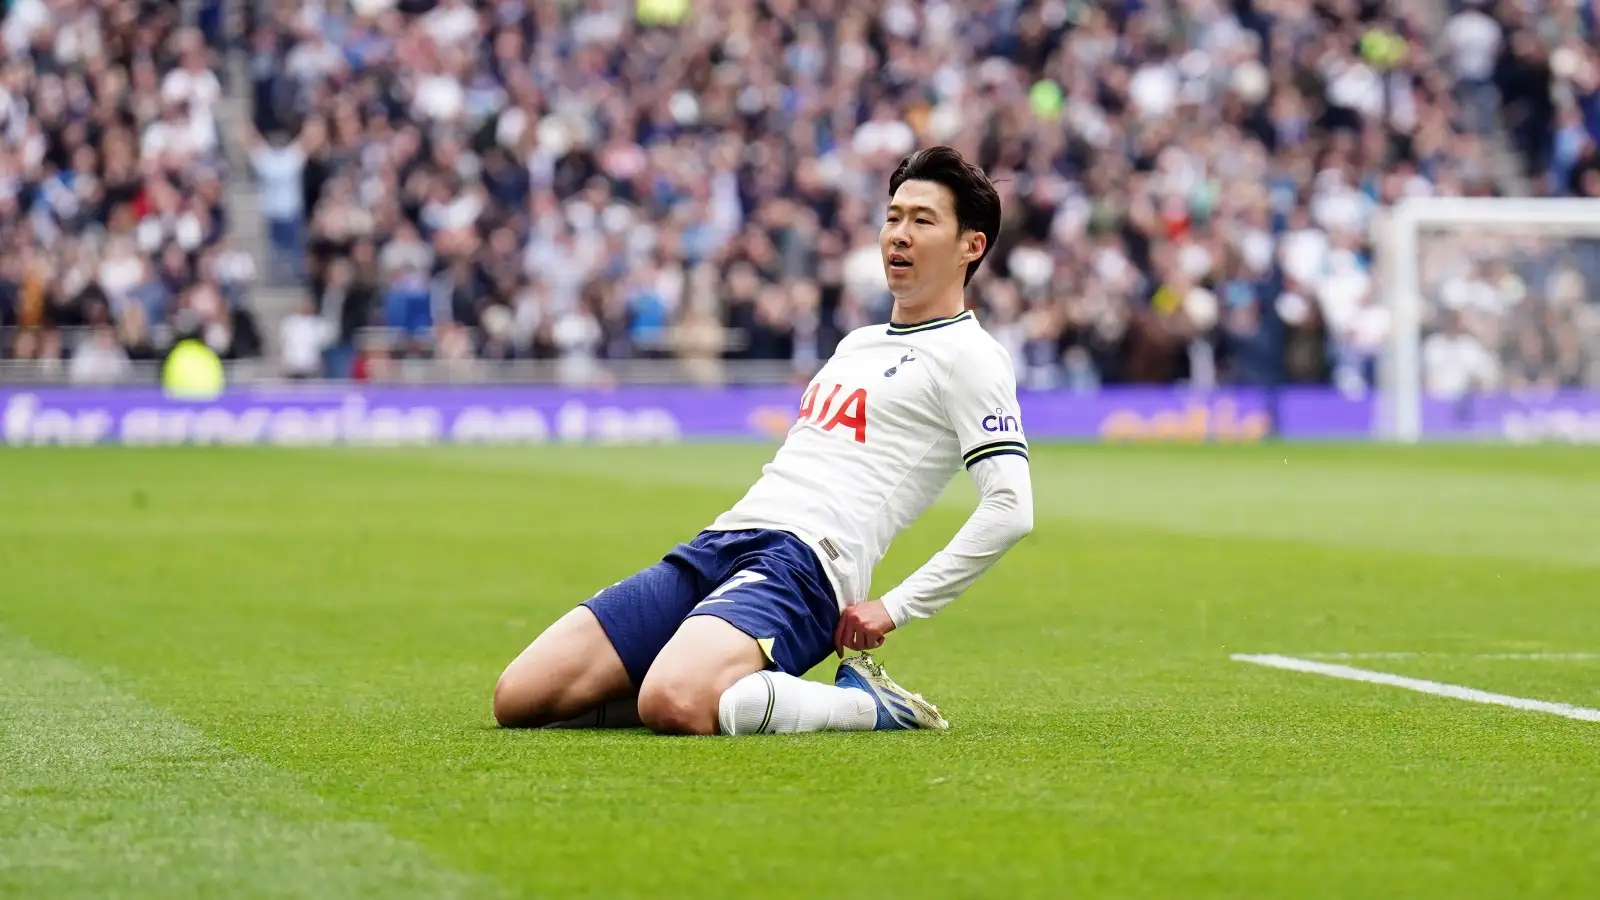 A breakdown of the stats behind Son Heung-min’s 100 Prem goals